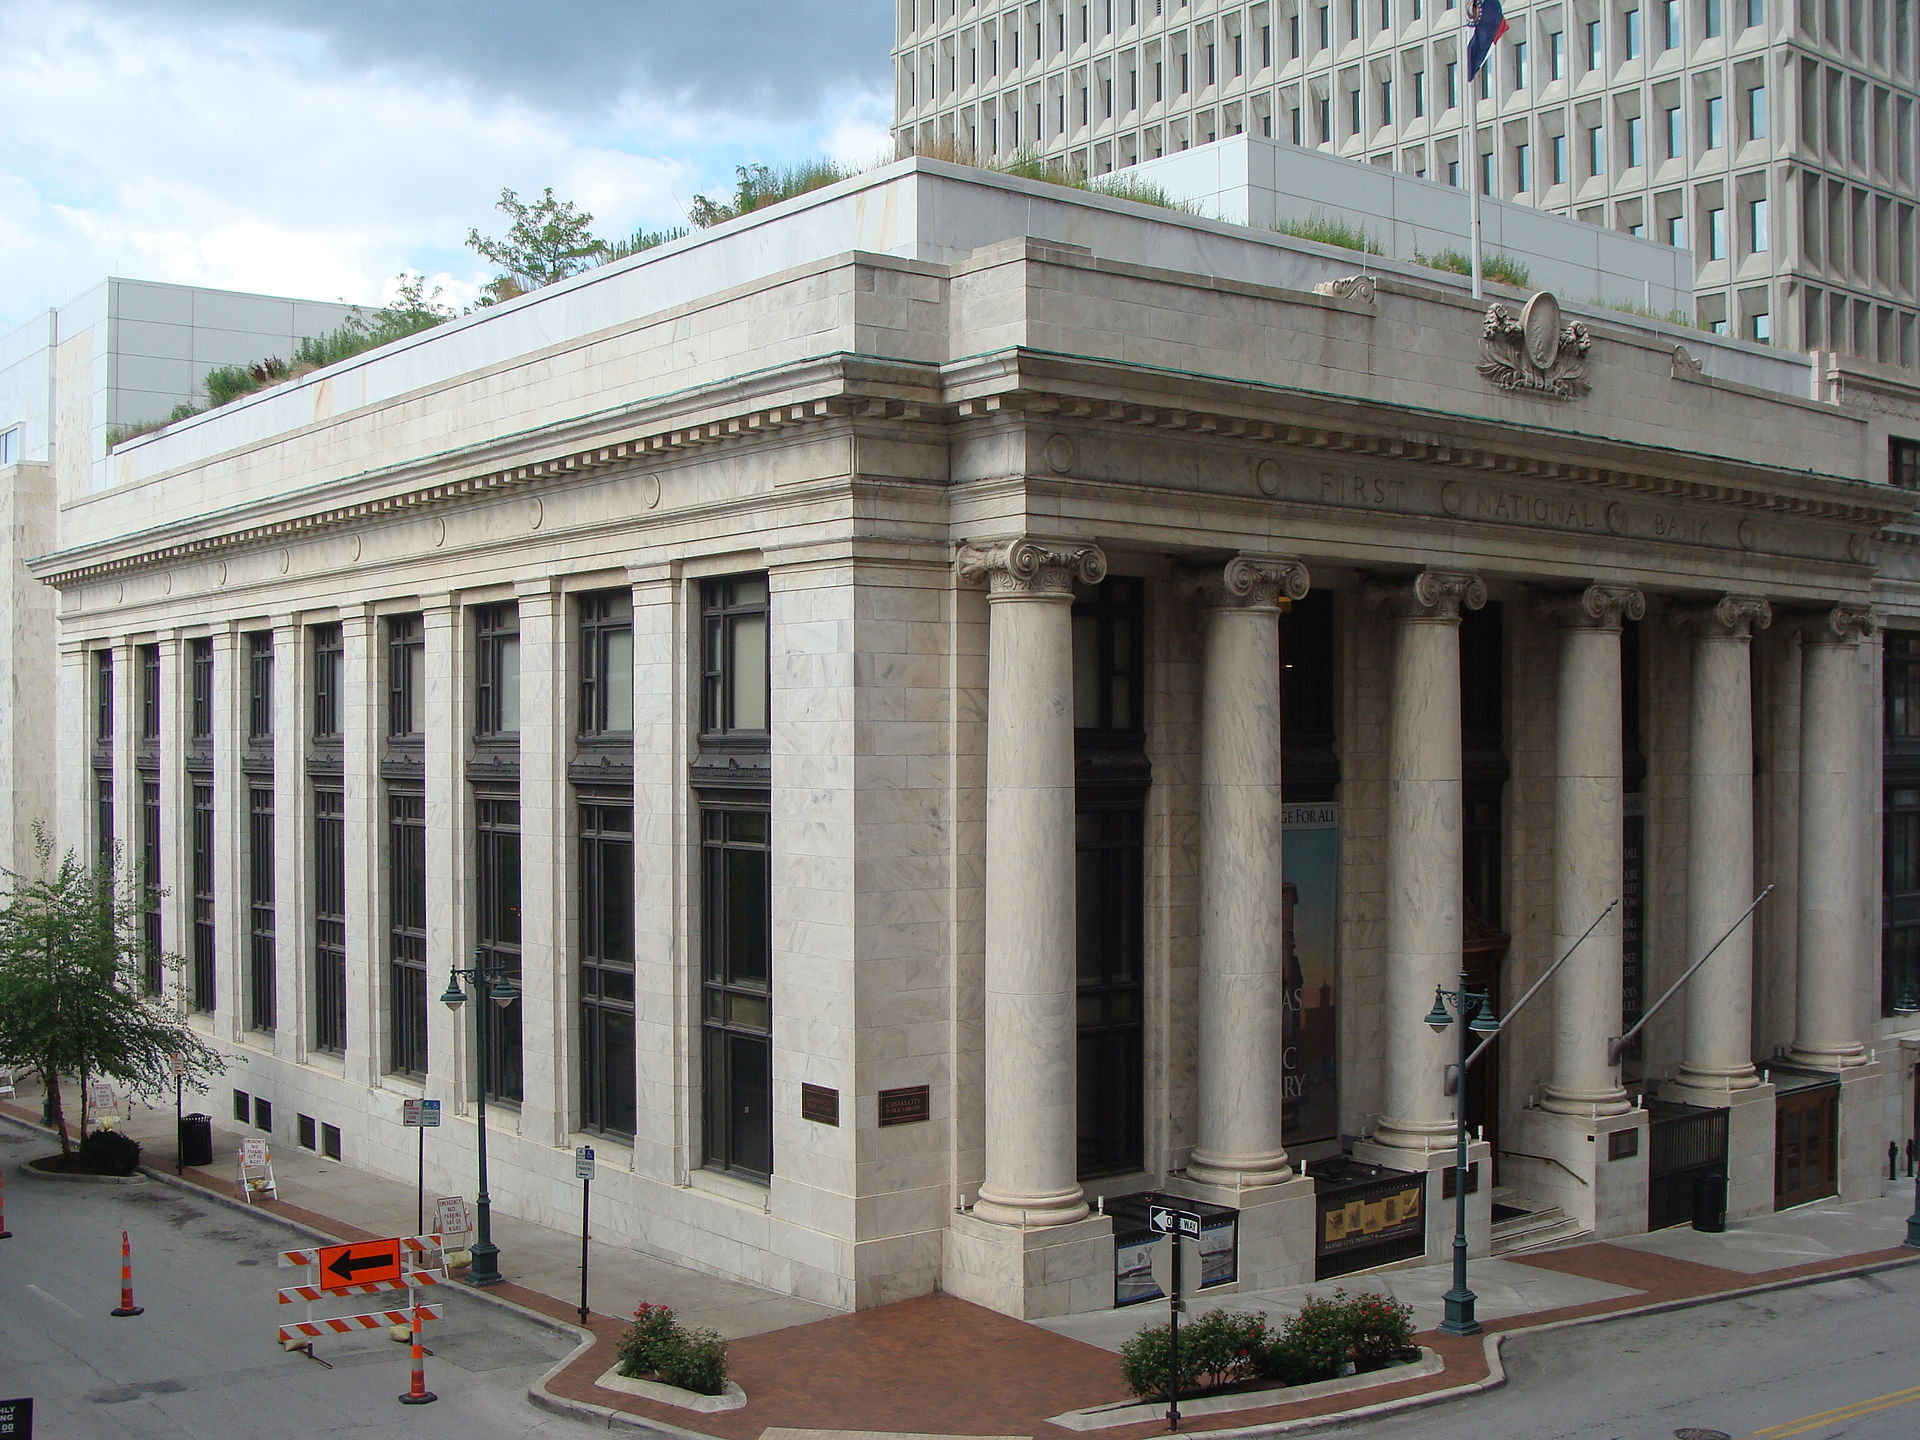 The Kansas City Public Library – Central Library